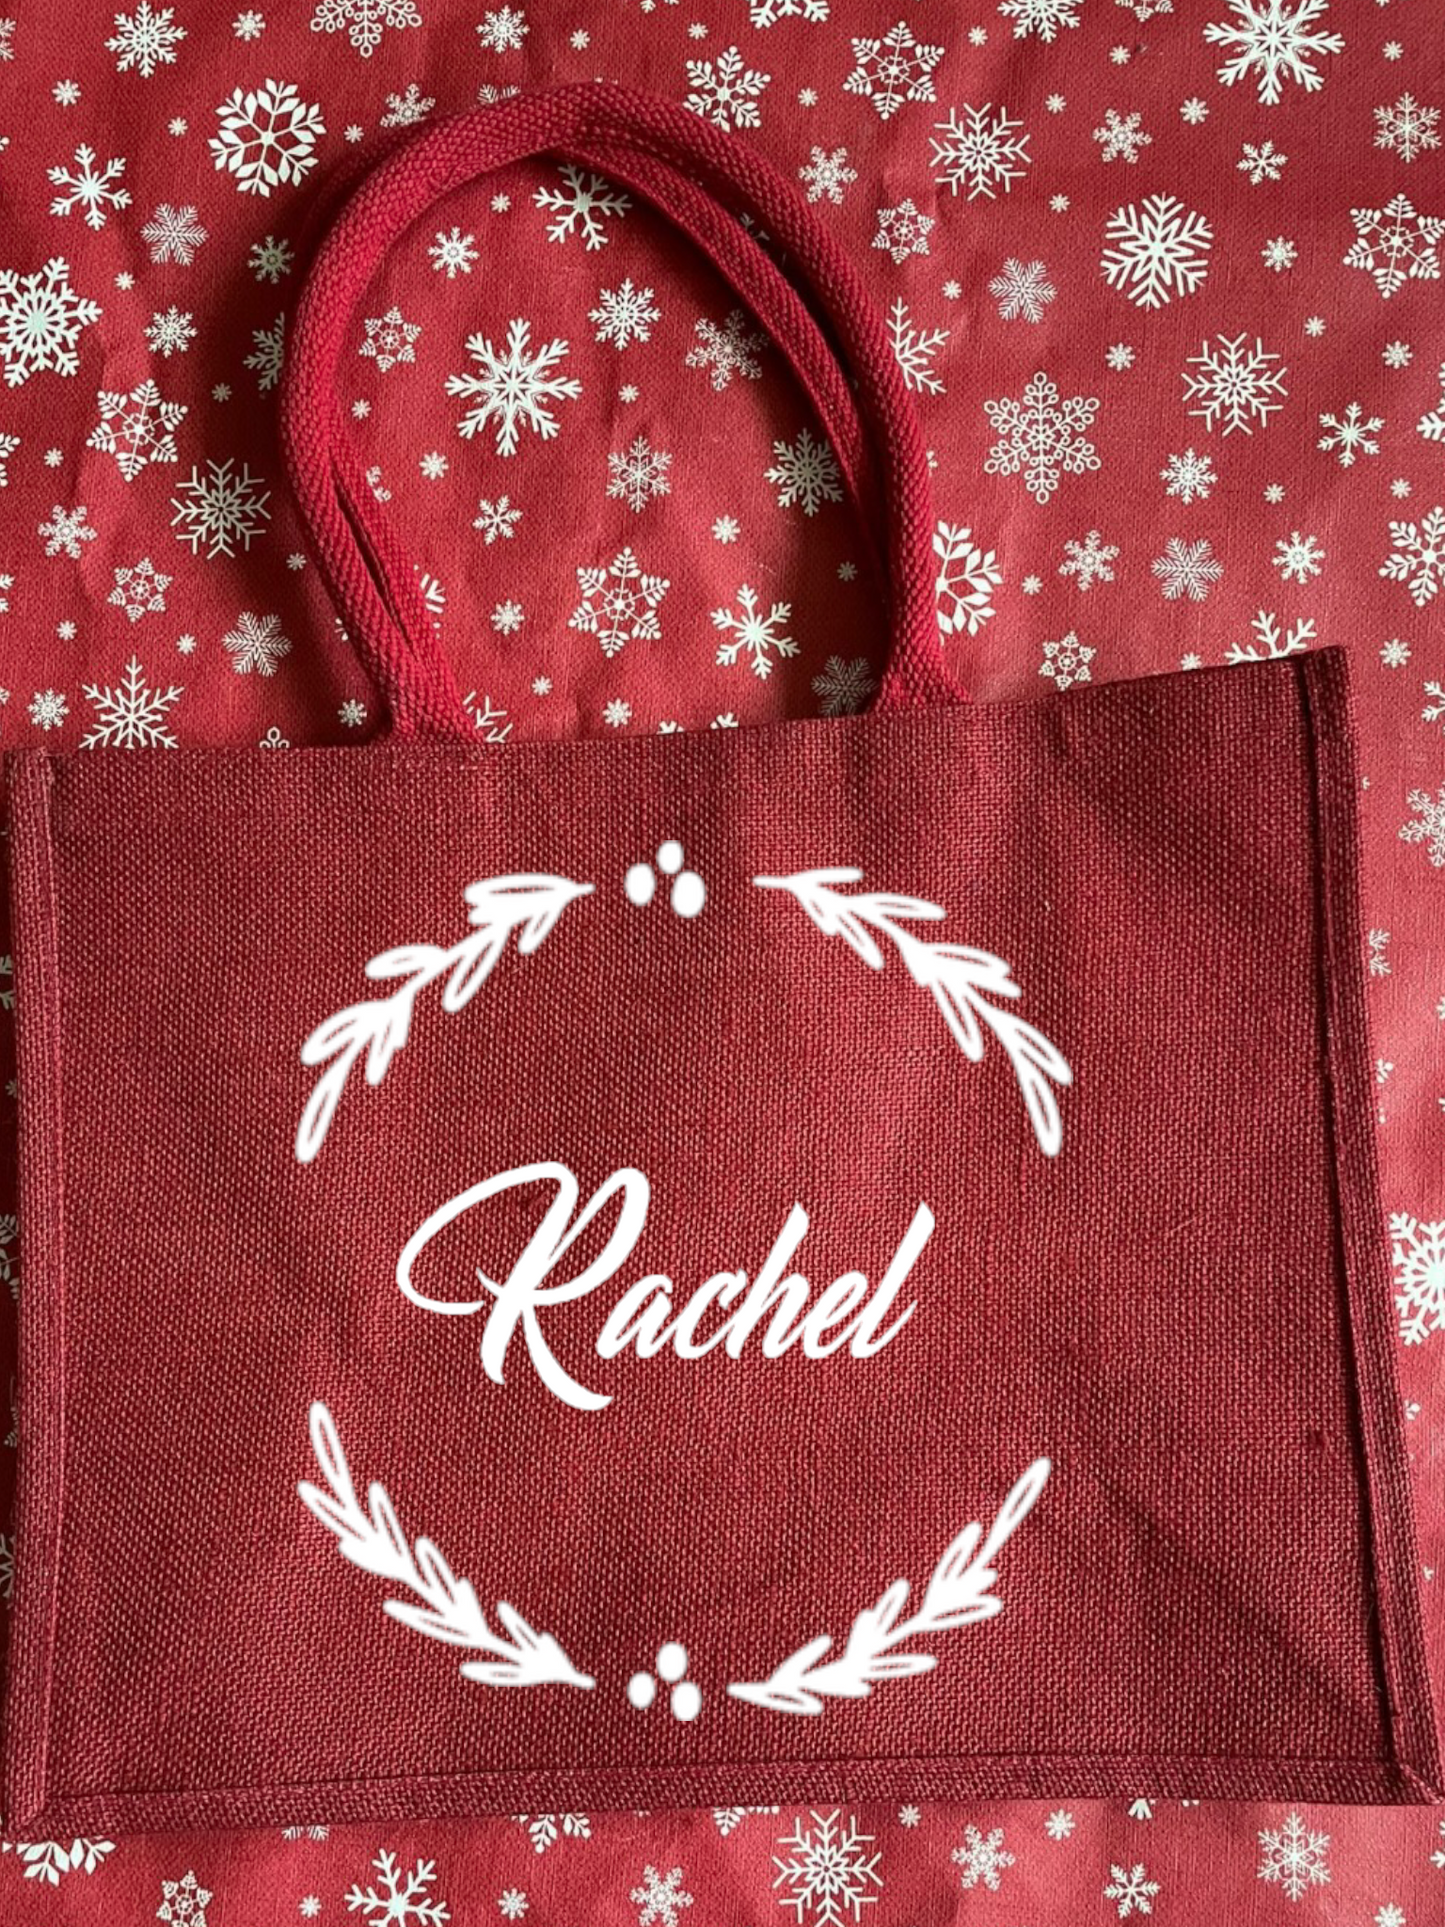 Large hessian / jute personalised Christmas tote bag. Gift or shopping bag, choice of designs.